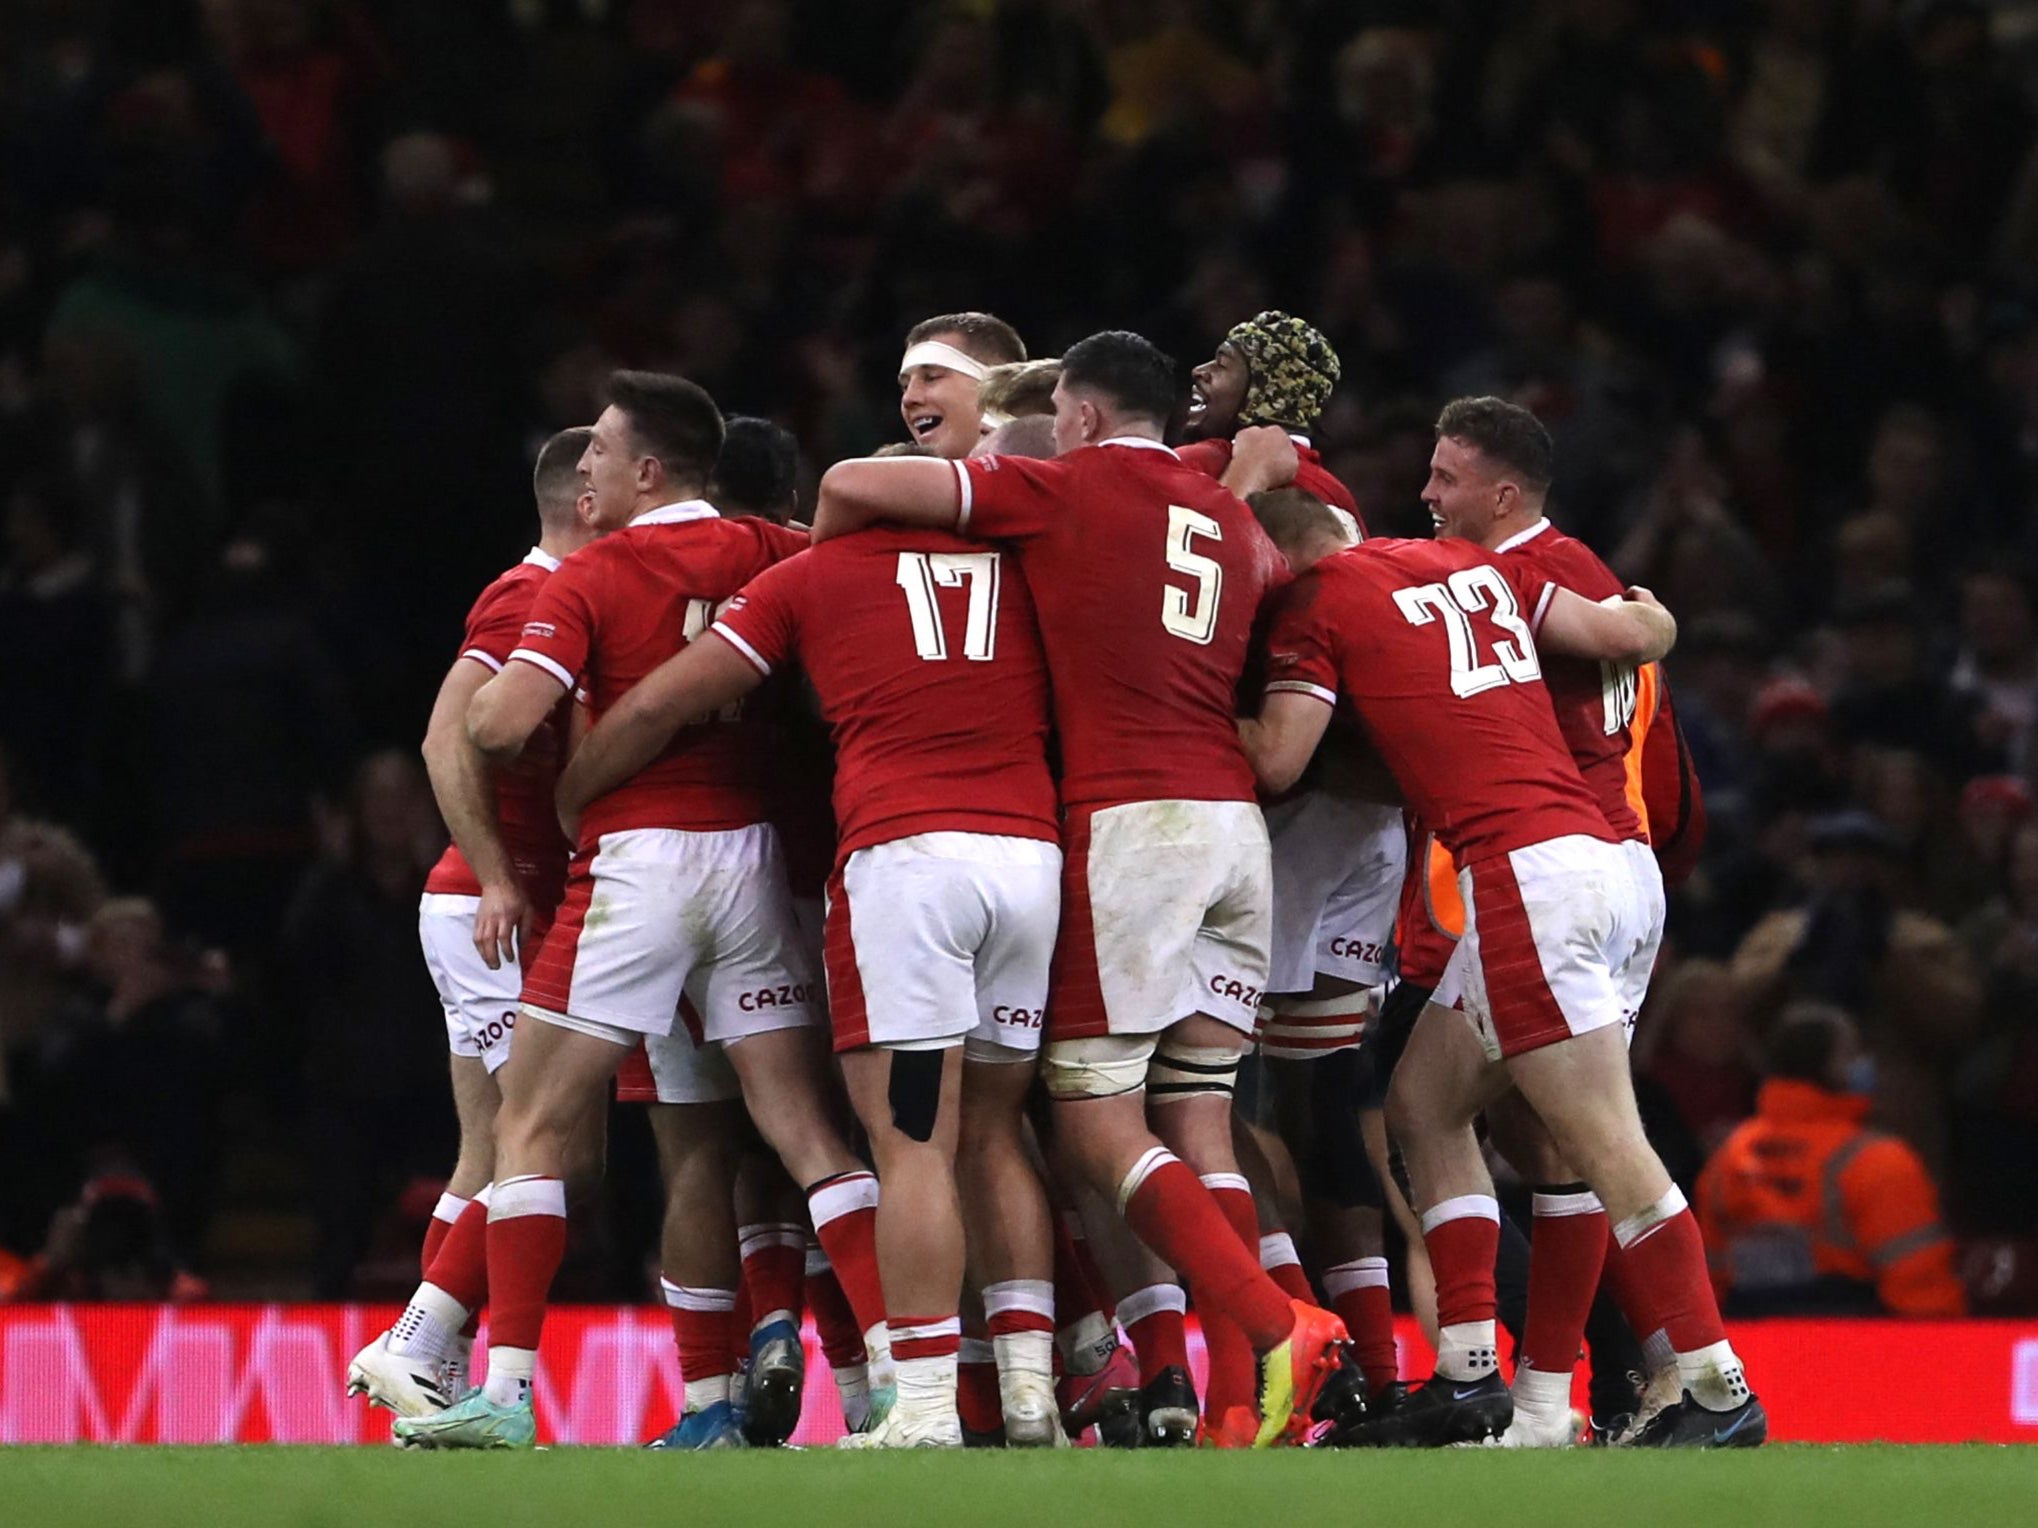 Wales ended injury-hit autumn campaign with victory over Australia